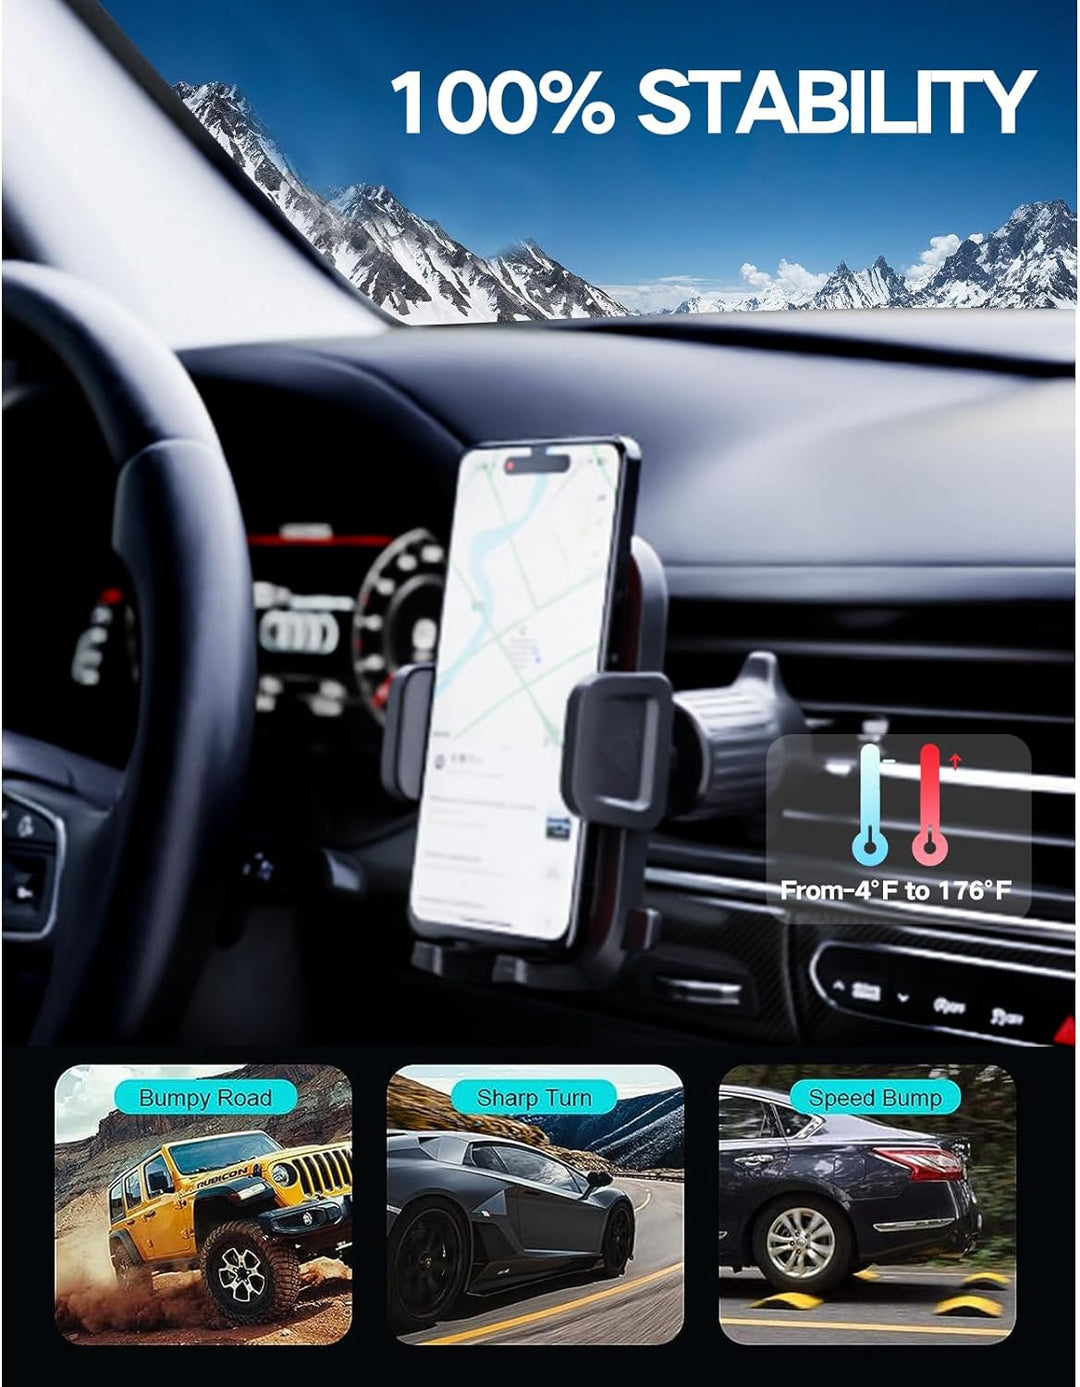 Phone Holder Car, Phone Mount for Car [Powerful Suction] Hands-Free Car Phone Holder Windshield Dashboard Vent, for Iphone, Phone Mount for Car, Fit for All Smartphones